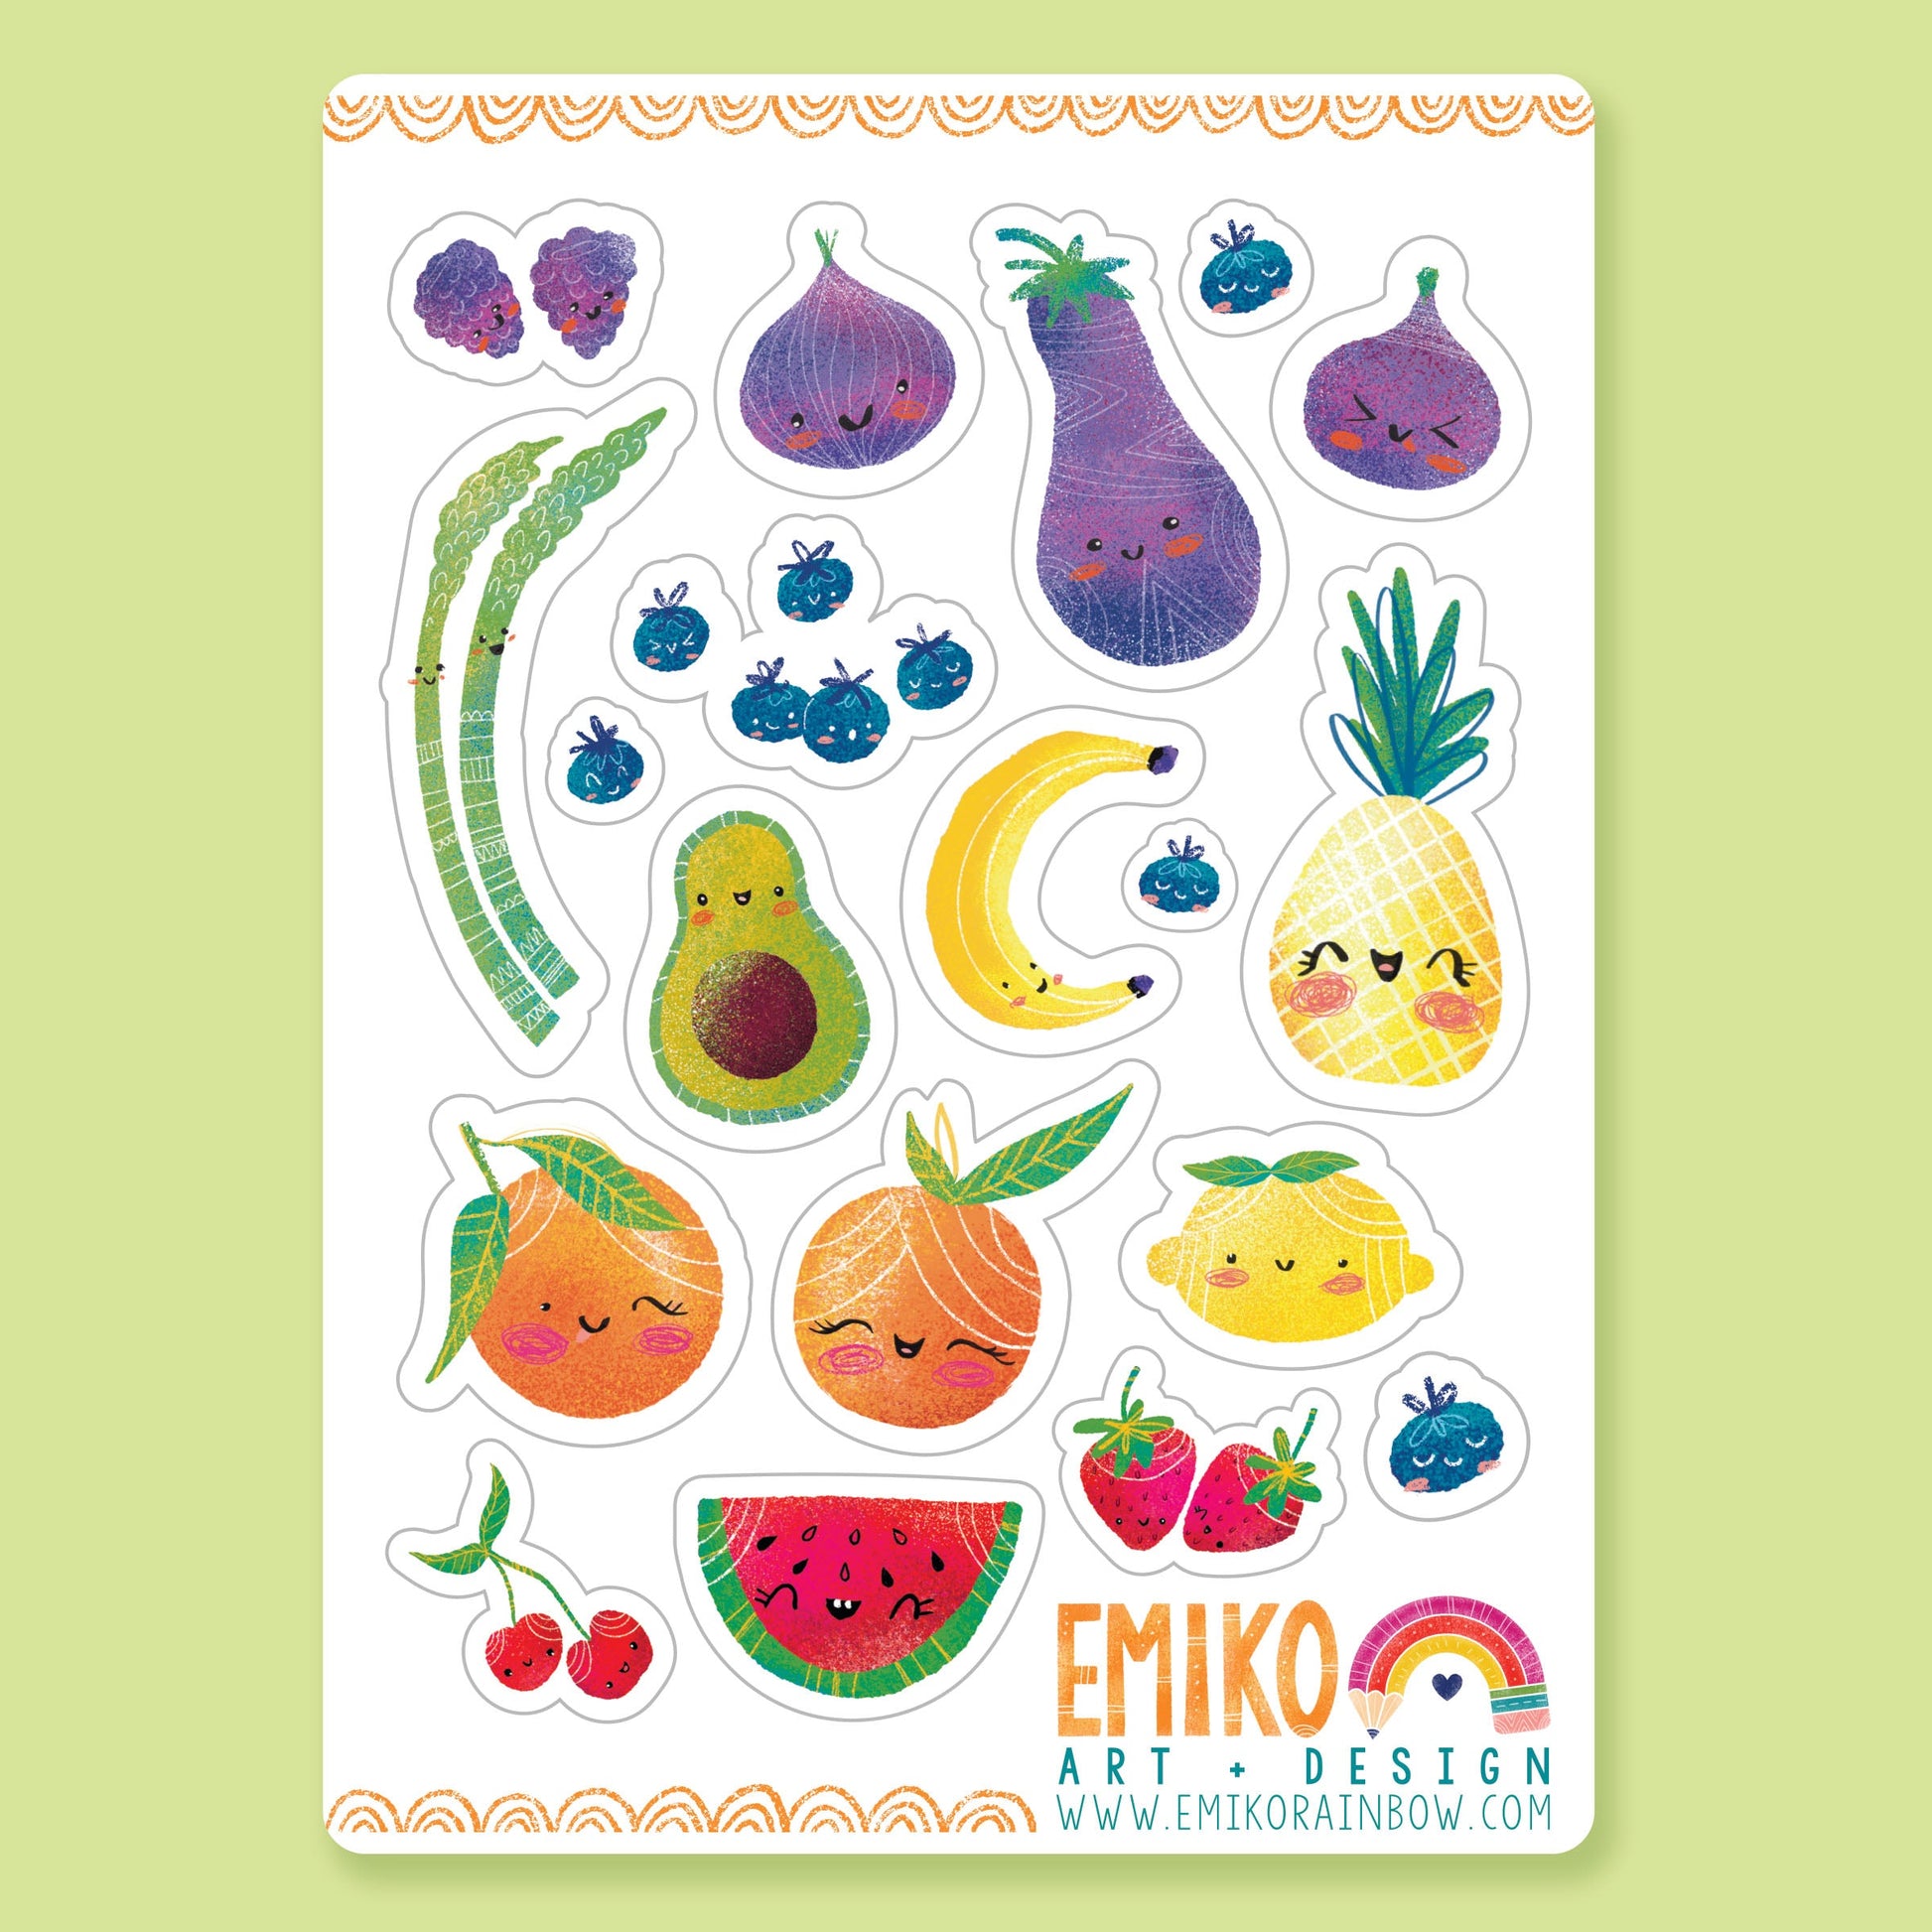 White sheet of colorful stickers including blackberries, figs, eggplant, blueberries, avocado, asparagus, banana, pineapple, lemon, oranges, strawberries, cherries and watermelon. DEcorative orange border on top and bottom of sheet. 